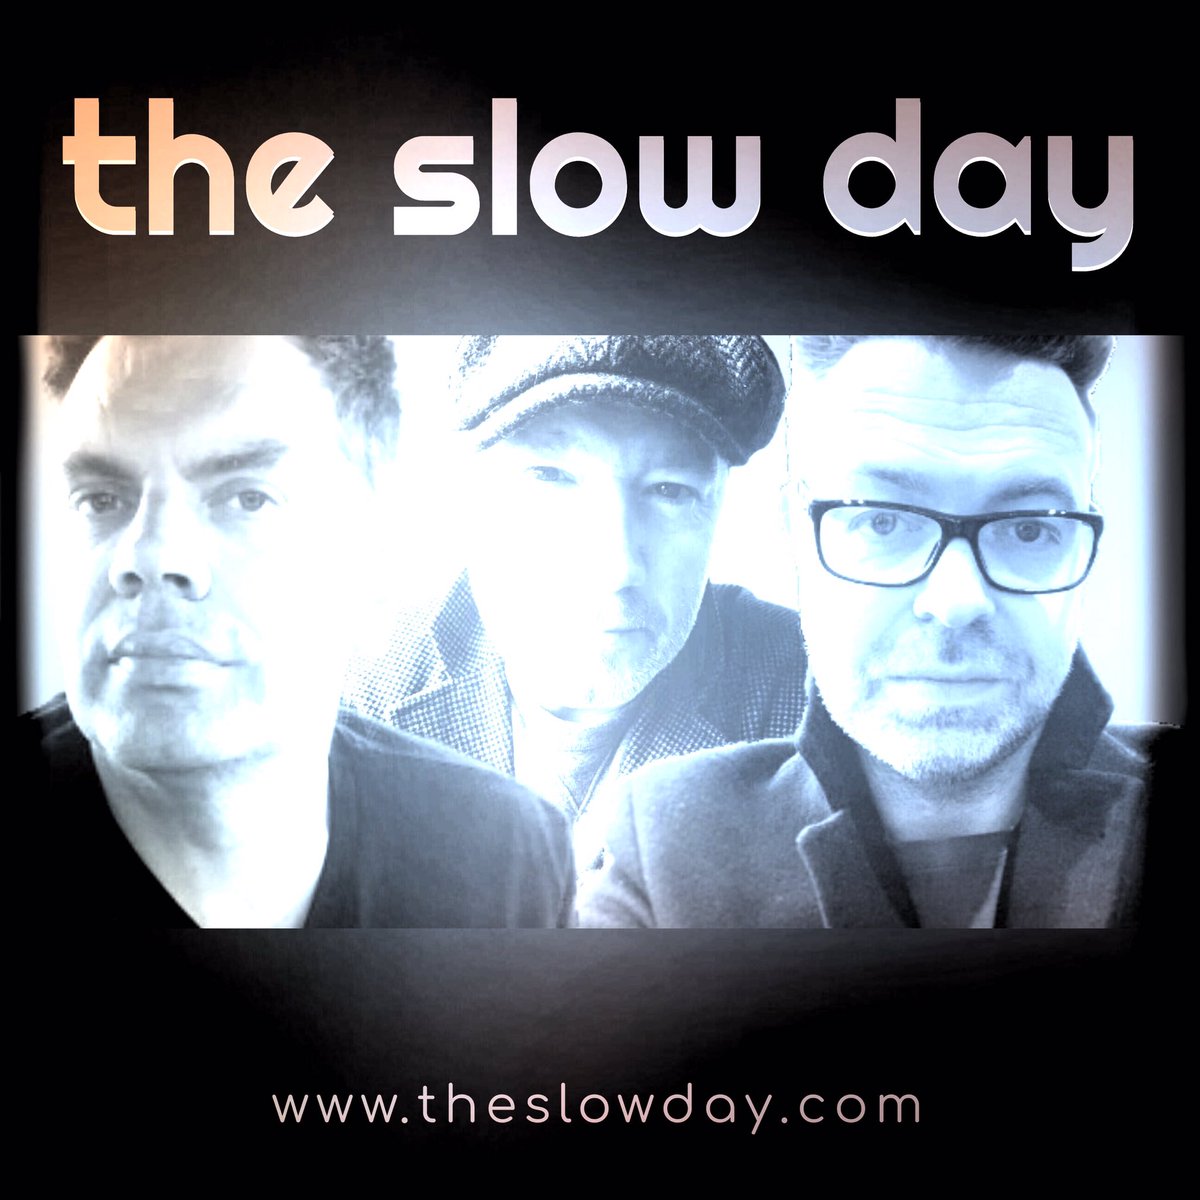 Some big gig announcements coming soon! Stay tuned! (Especially if you’re in the South 😉) #TheSlowDay #Music #LiveMusic #Rock #Band